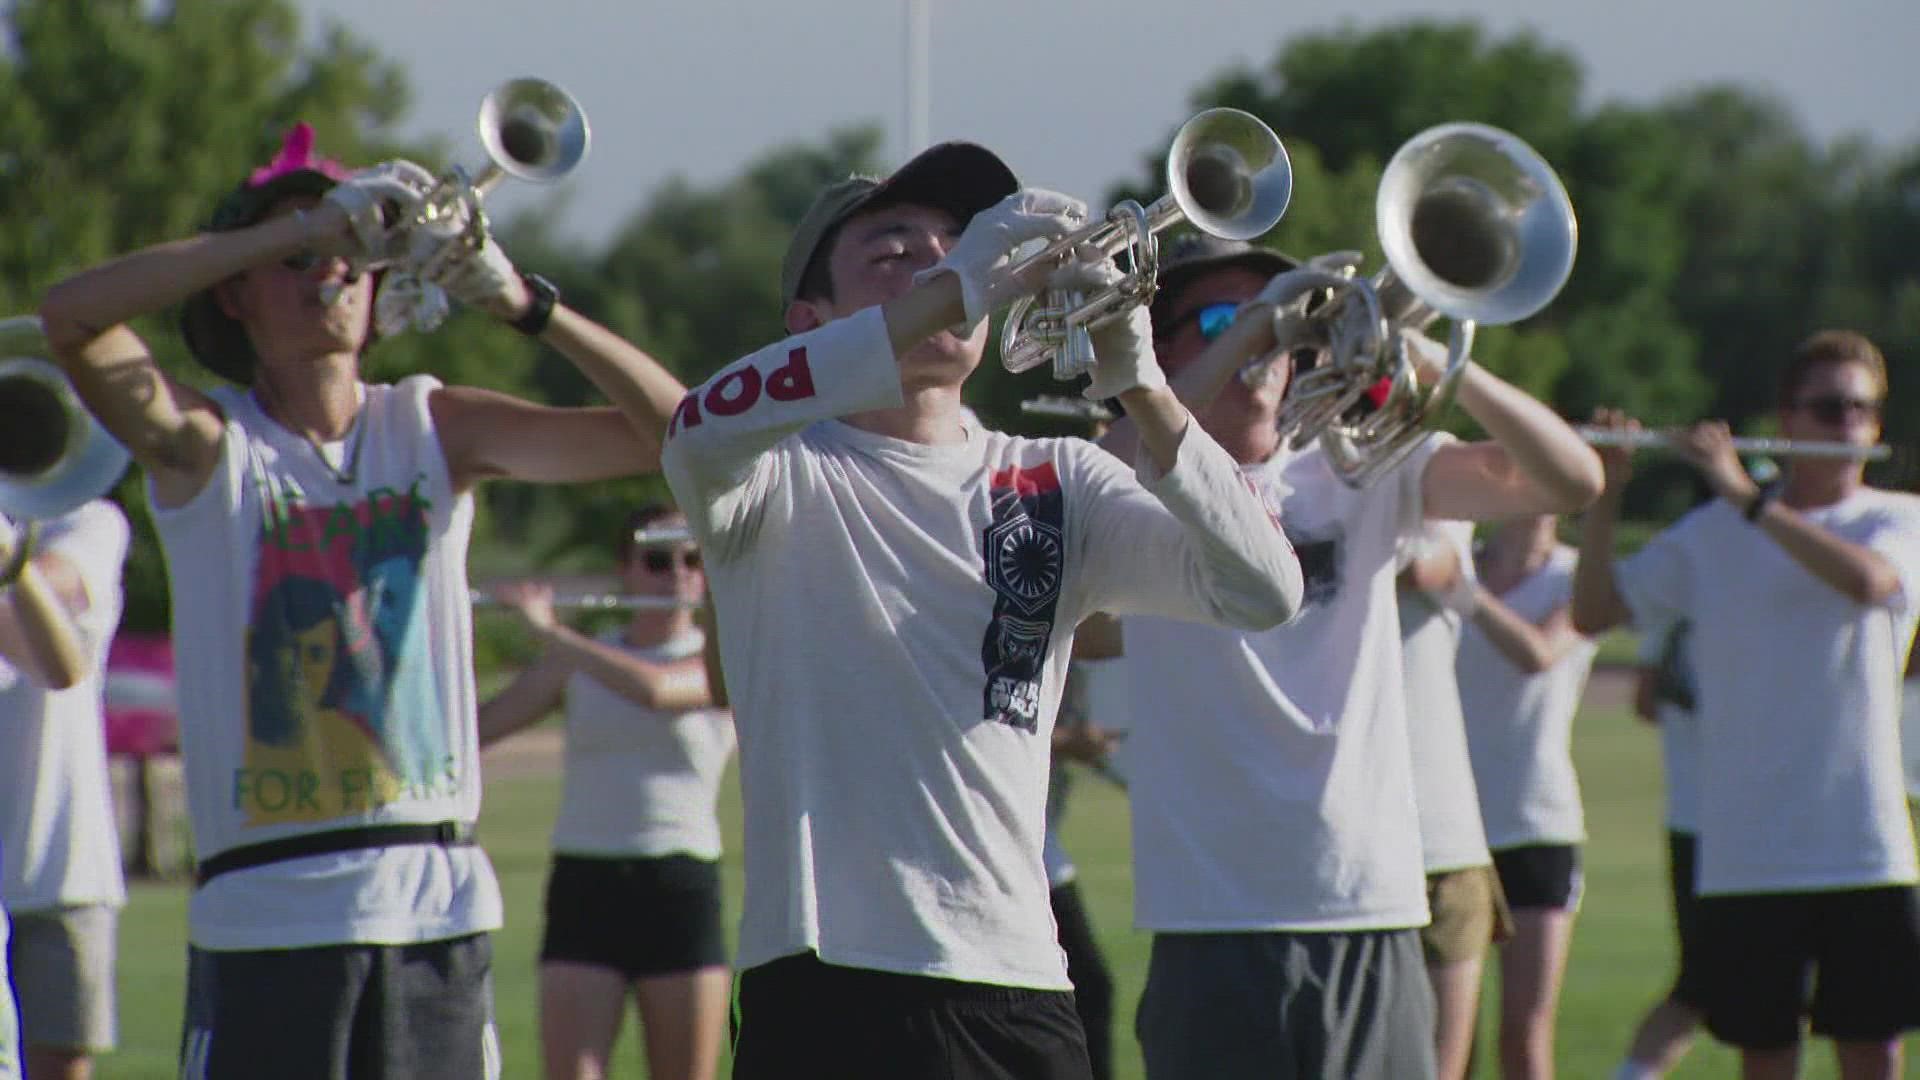 The Fossil Ridge High School Marching Band is giving students the self-confidence to succeed on and off the field.